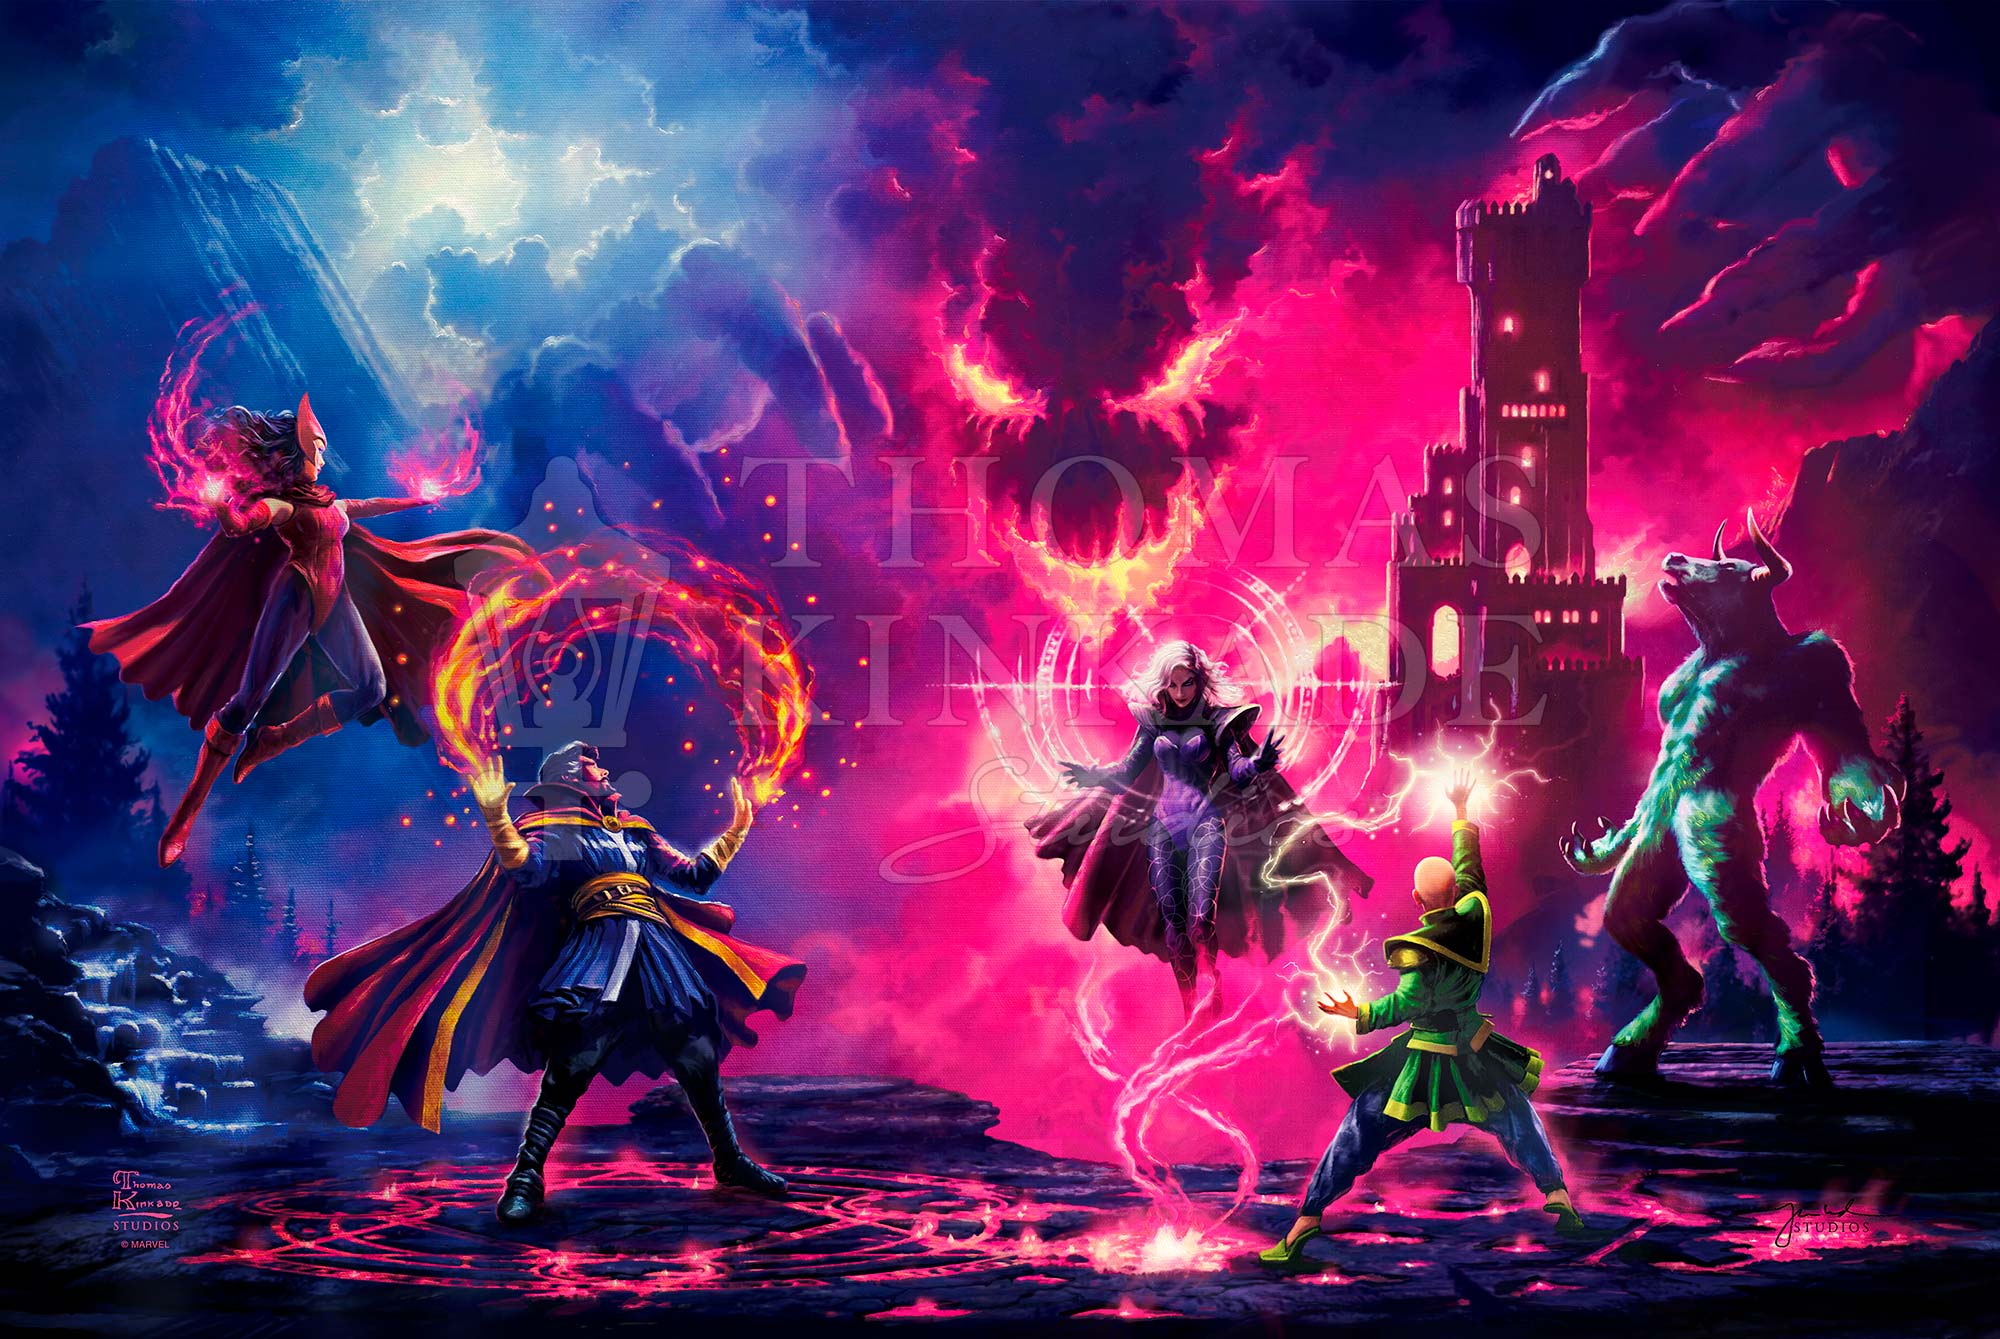 Doctor Strange and the Dark Despot, Dormammu. Scarlet Witch, the mistress of “Hex Power”, Rintrah and Wong have entered the skirmish to join forces with Doctor Strange against the immortal energy of Dormammu. - Unframed